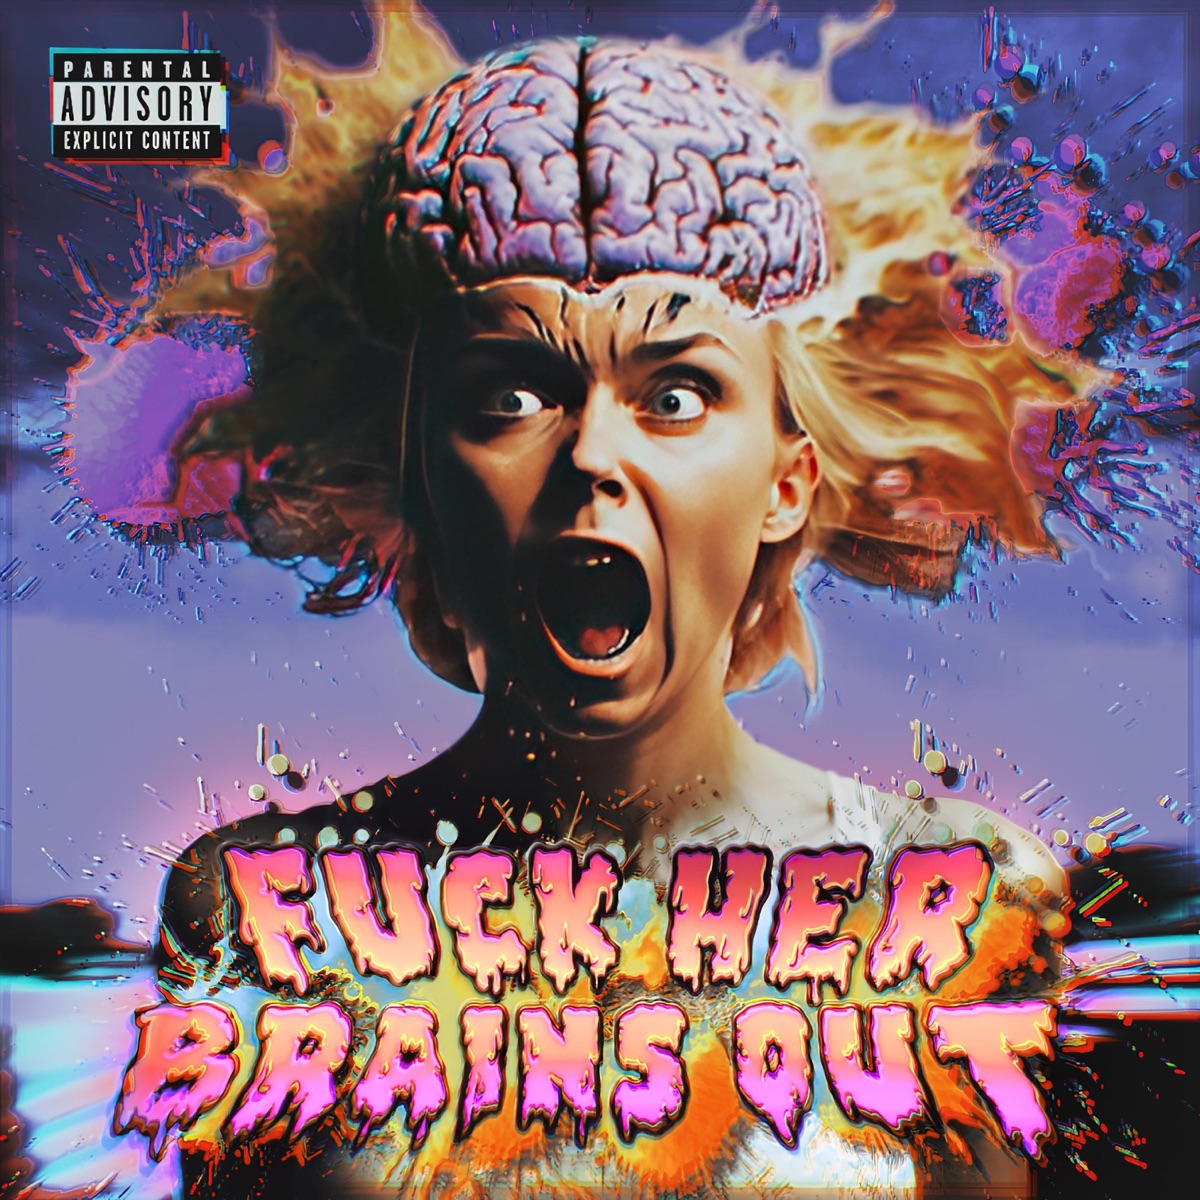 ankur barot recommends fuck her brain out pic